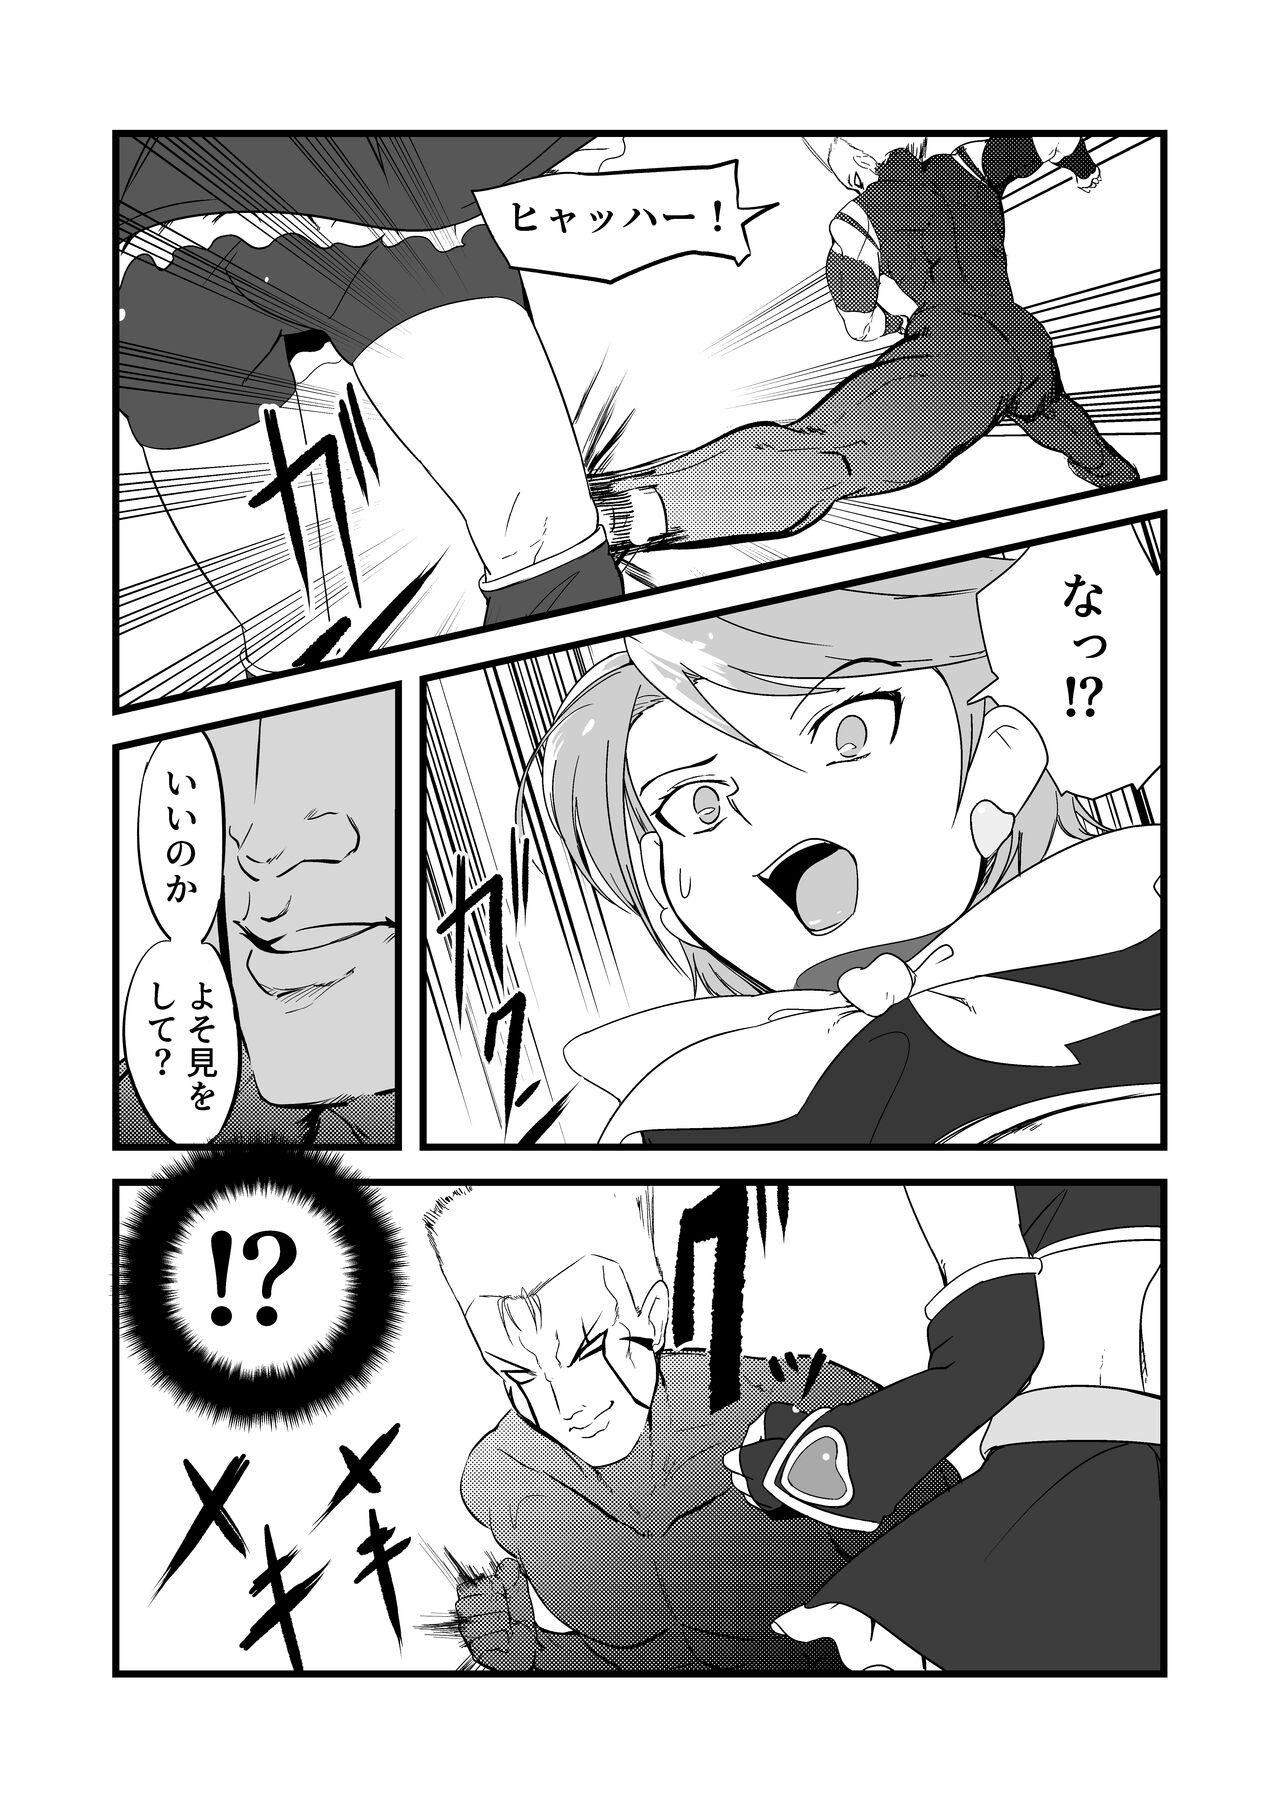 Gay Hunks Belly Crisis 7 - Pretty cure Hentai - Page 2